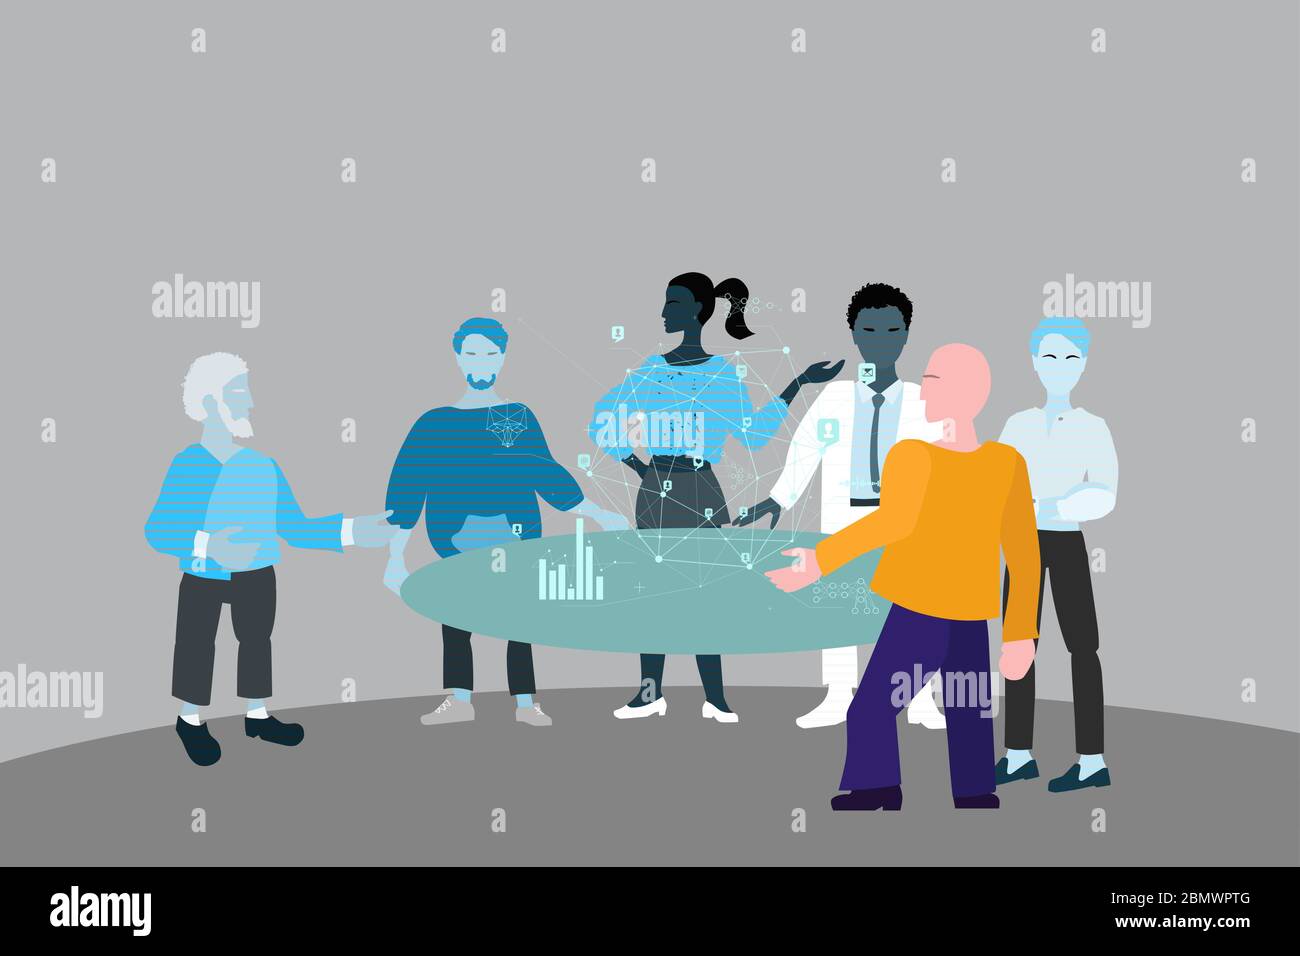 Online briefing and live conference. Workflow remotely, a group of people stands near a table in the form of holograms and discusses the project. Stock Vector